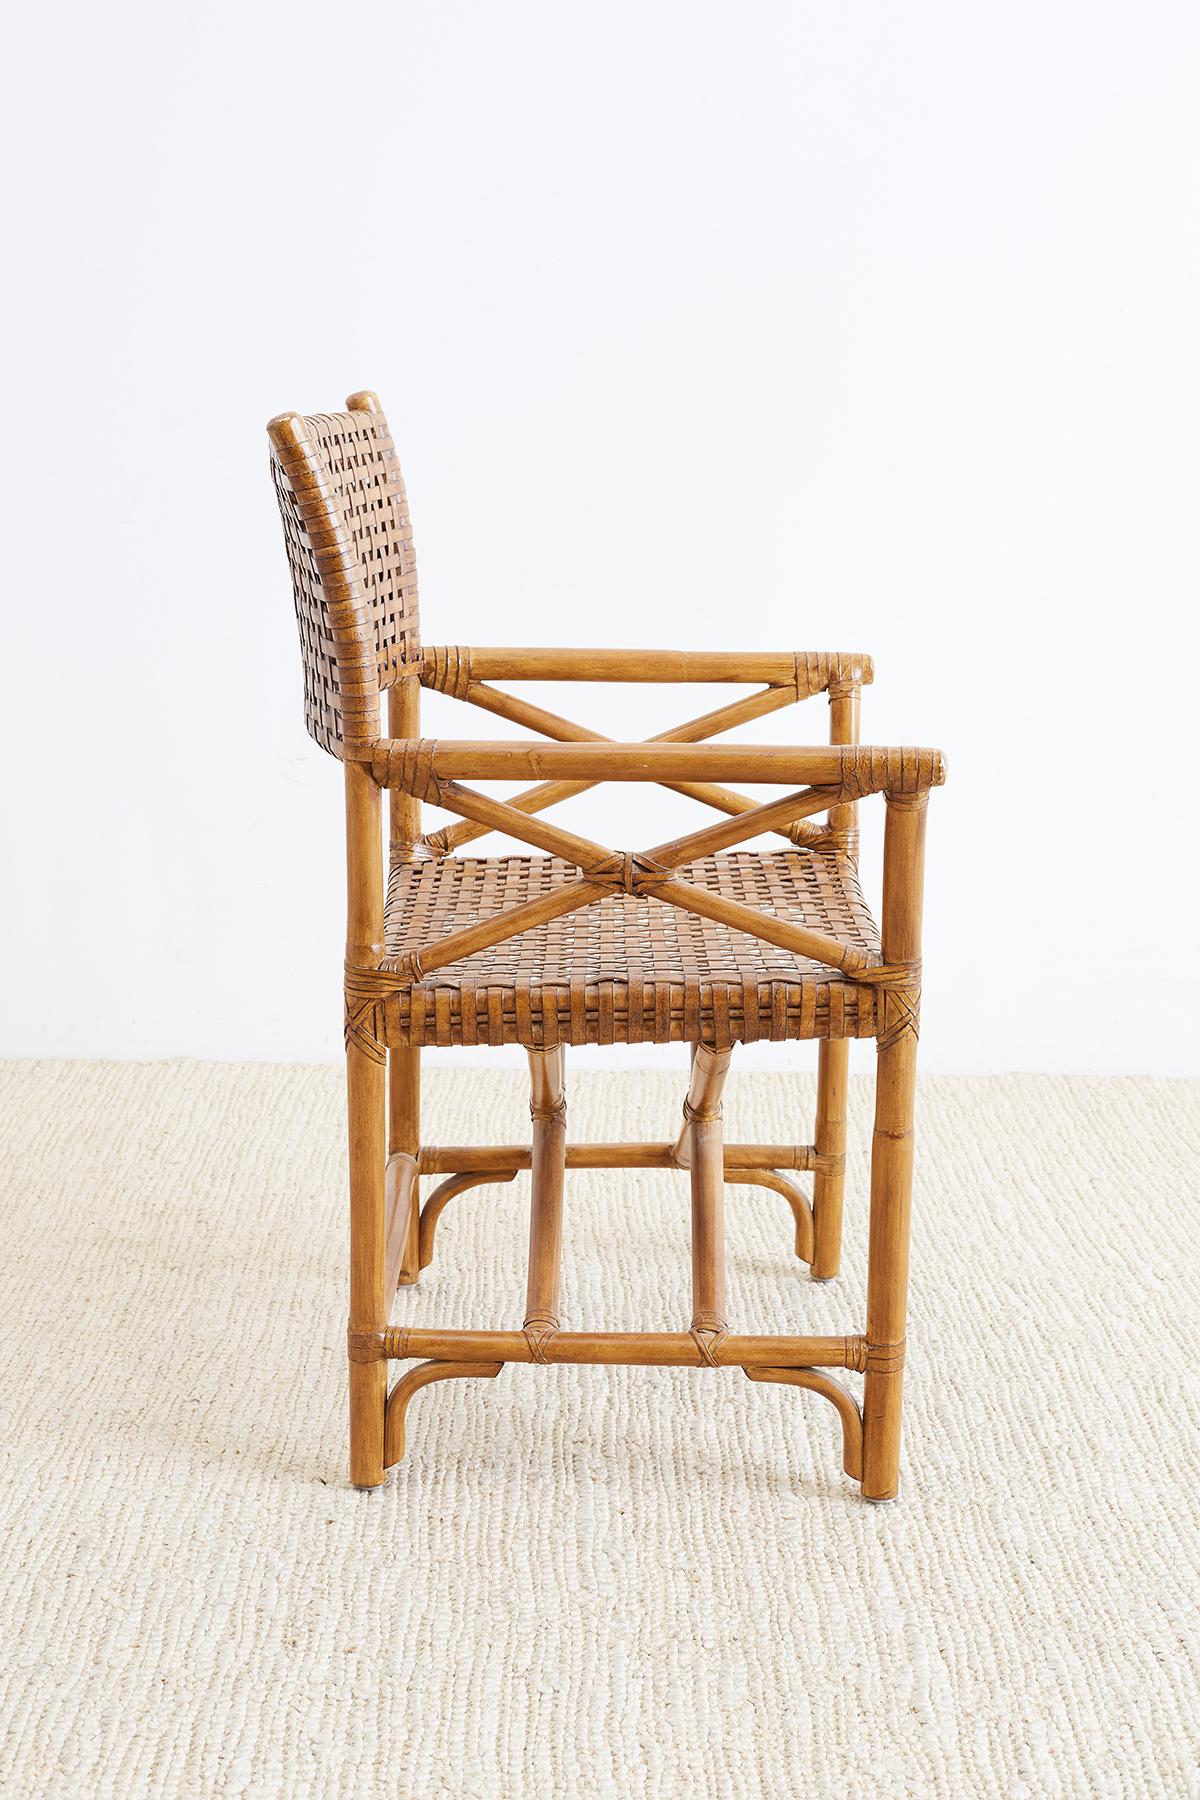 McGuire Style Woven Leather Rattan Dining Chairs In Distressed Condition In Rio Vista, CA